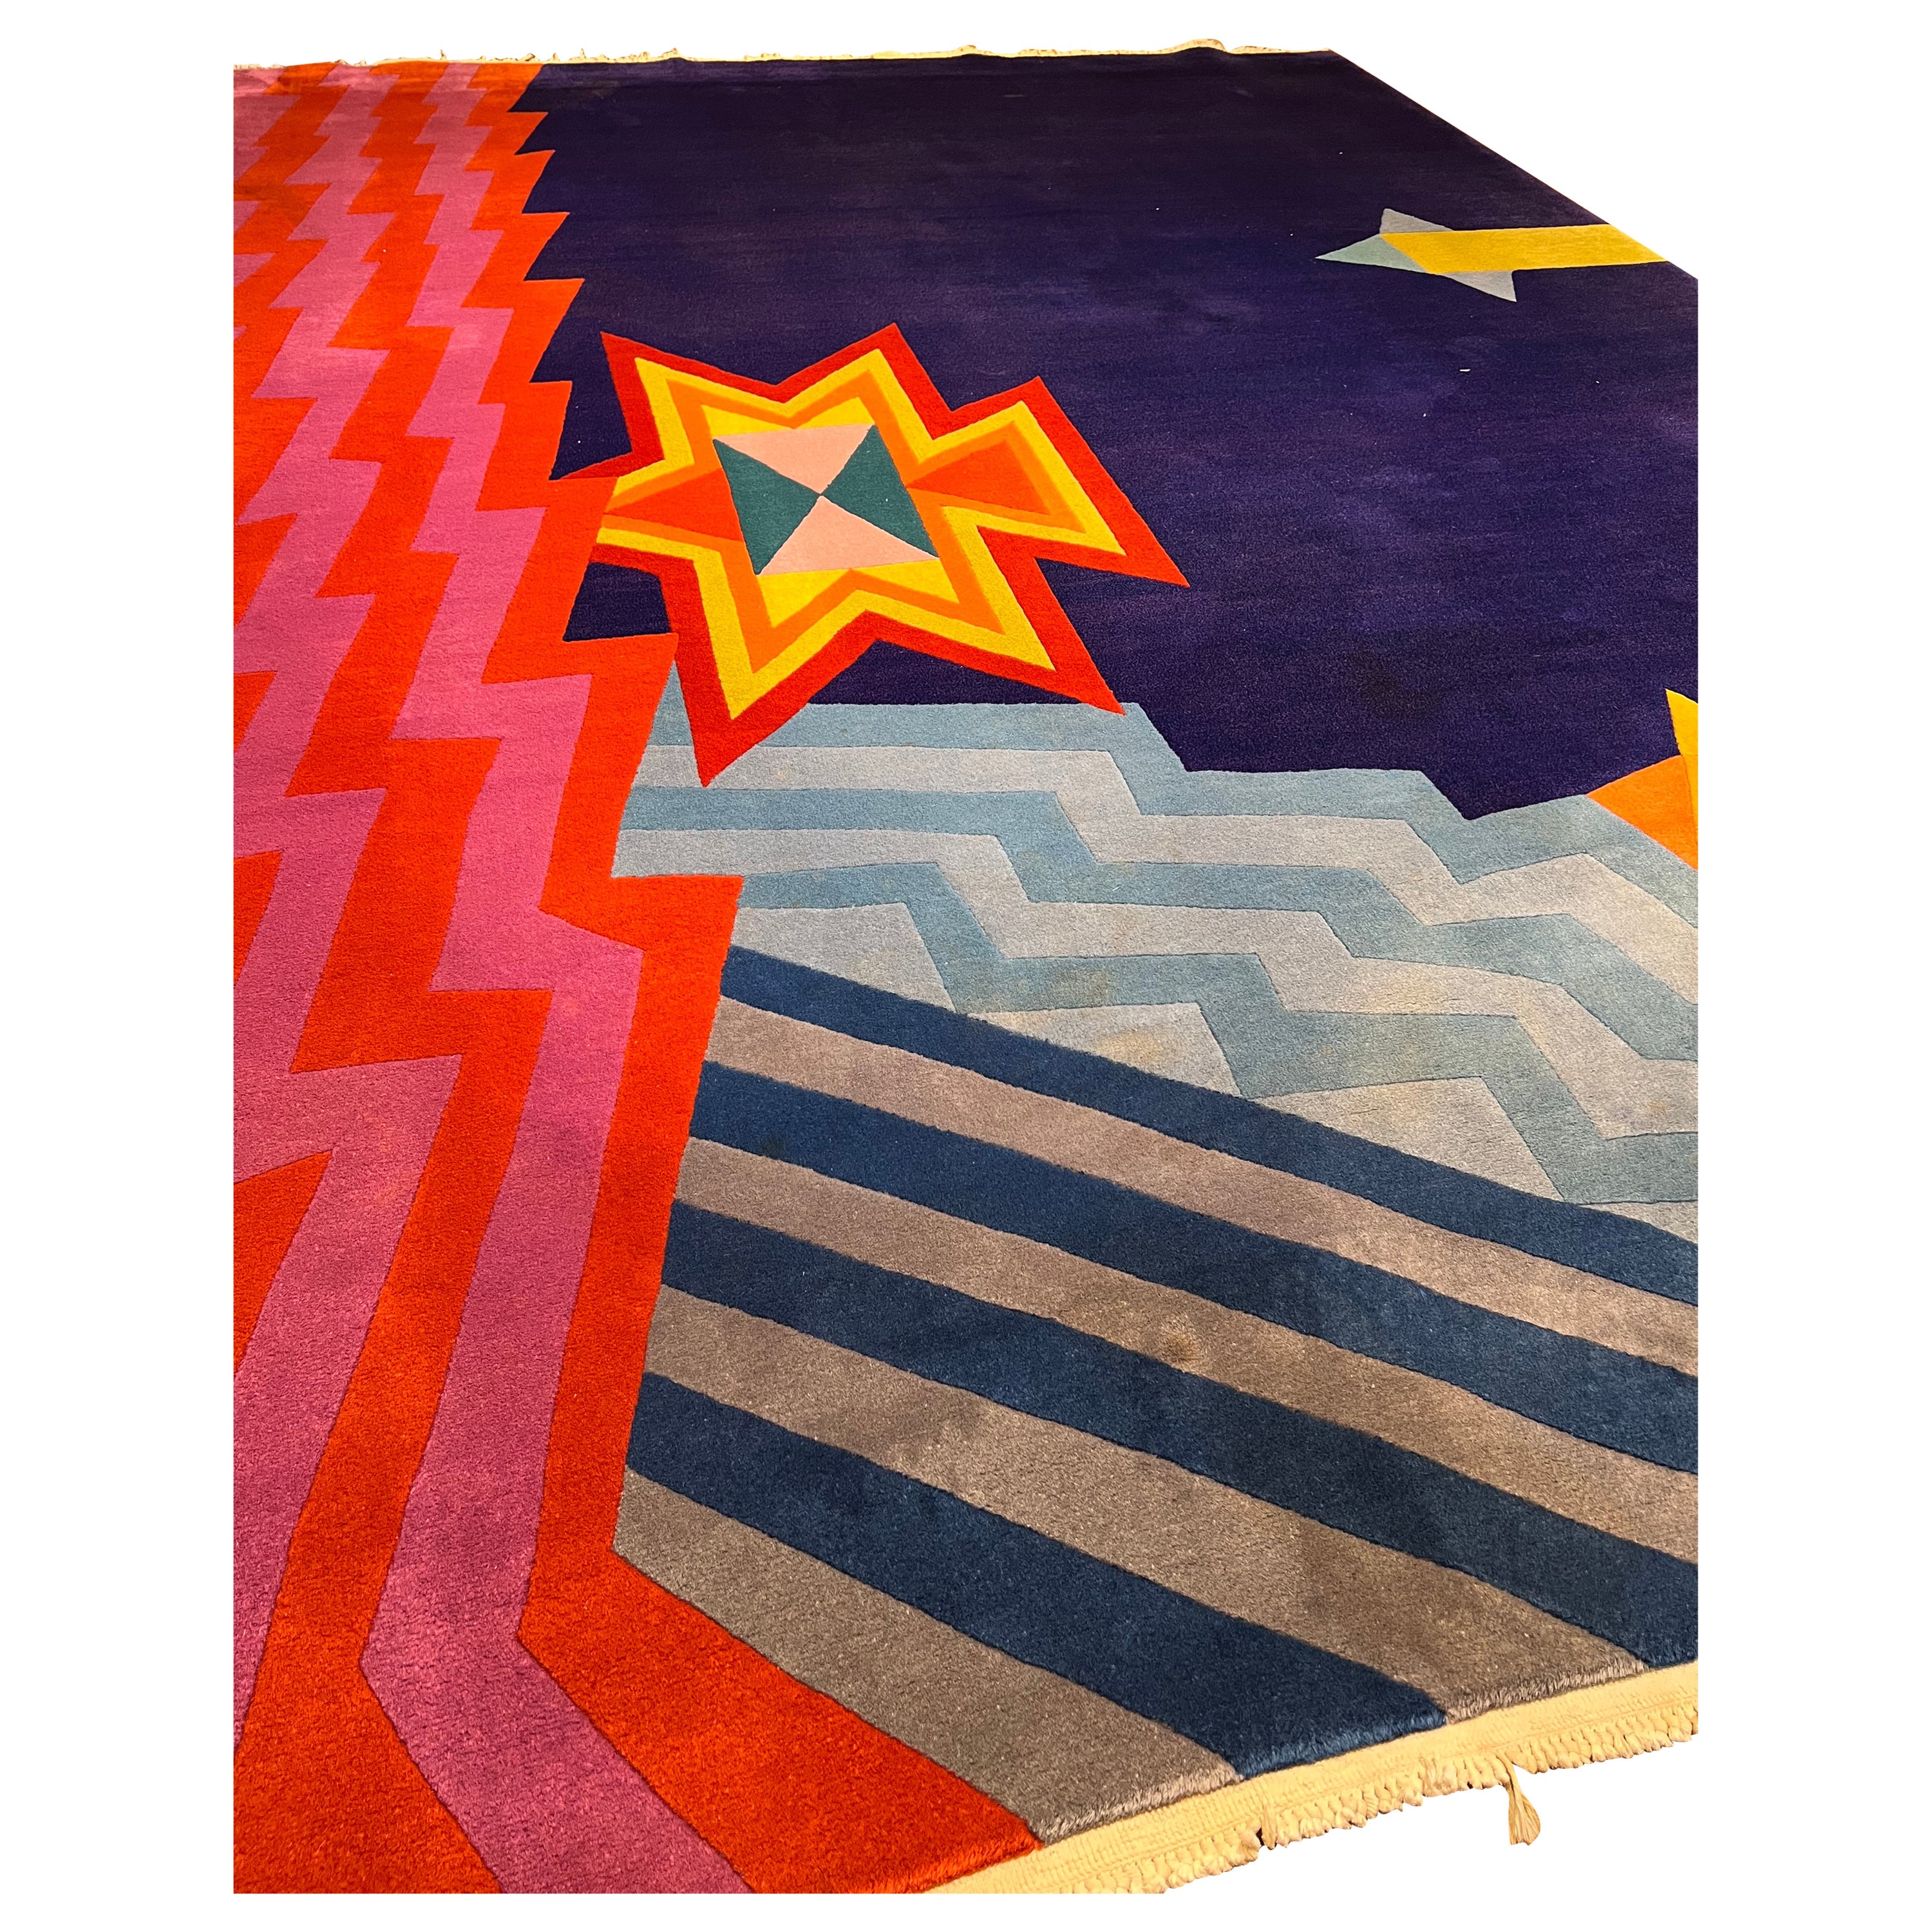 Hand-knotted rug with pure wool yarn on cotton warp. Node density: 90,000 per square meter. Hand-finished with intaglio shaving. Designed and implemented in 1989.
Limited edition of 5. 
Elio Palmisano's atelier represents one of the few Italian